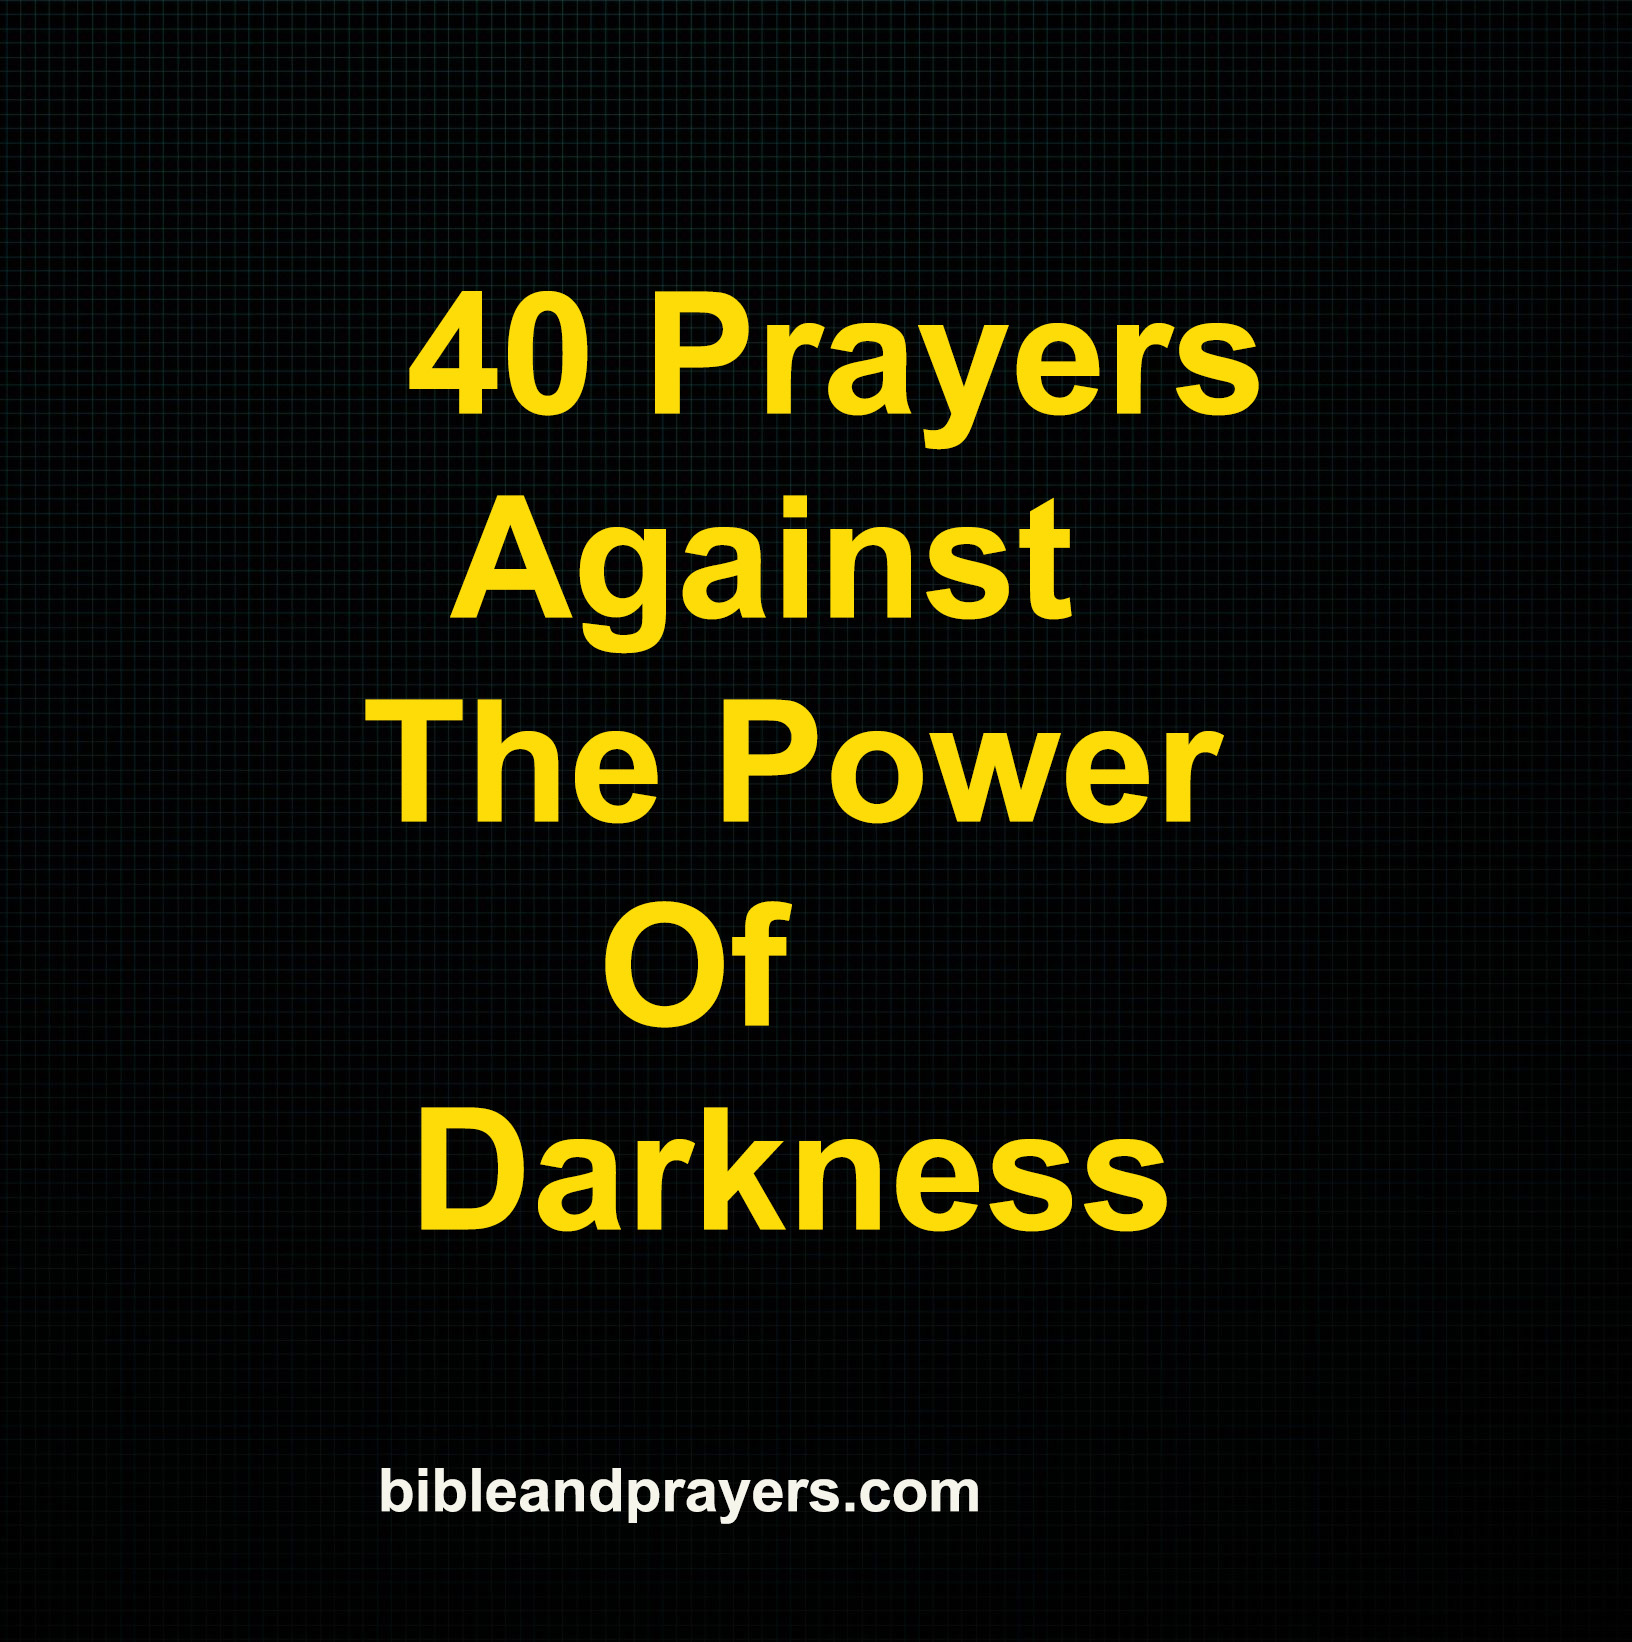 40 Prayers Against The Power Of Darkness